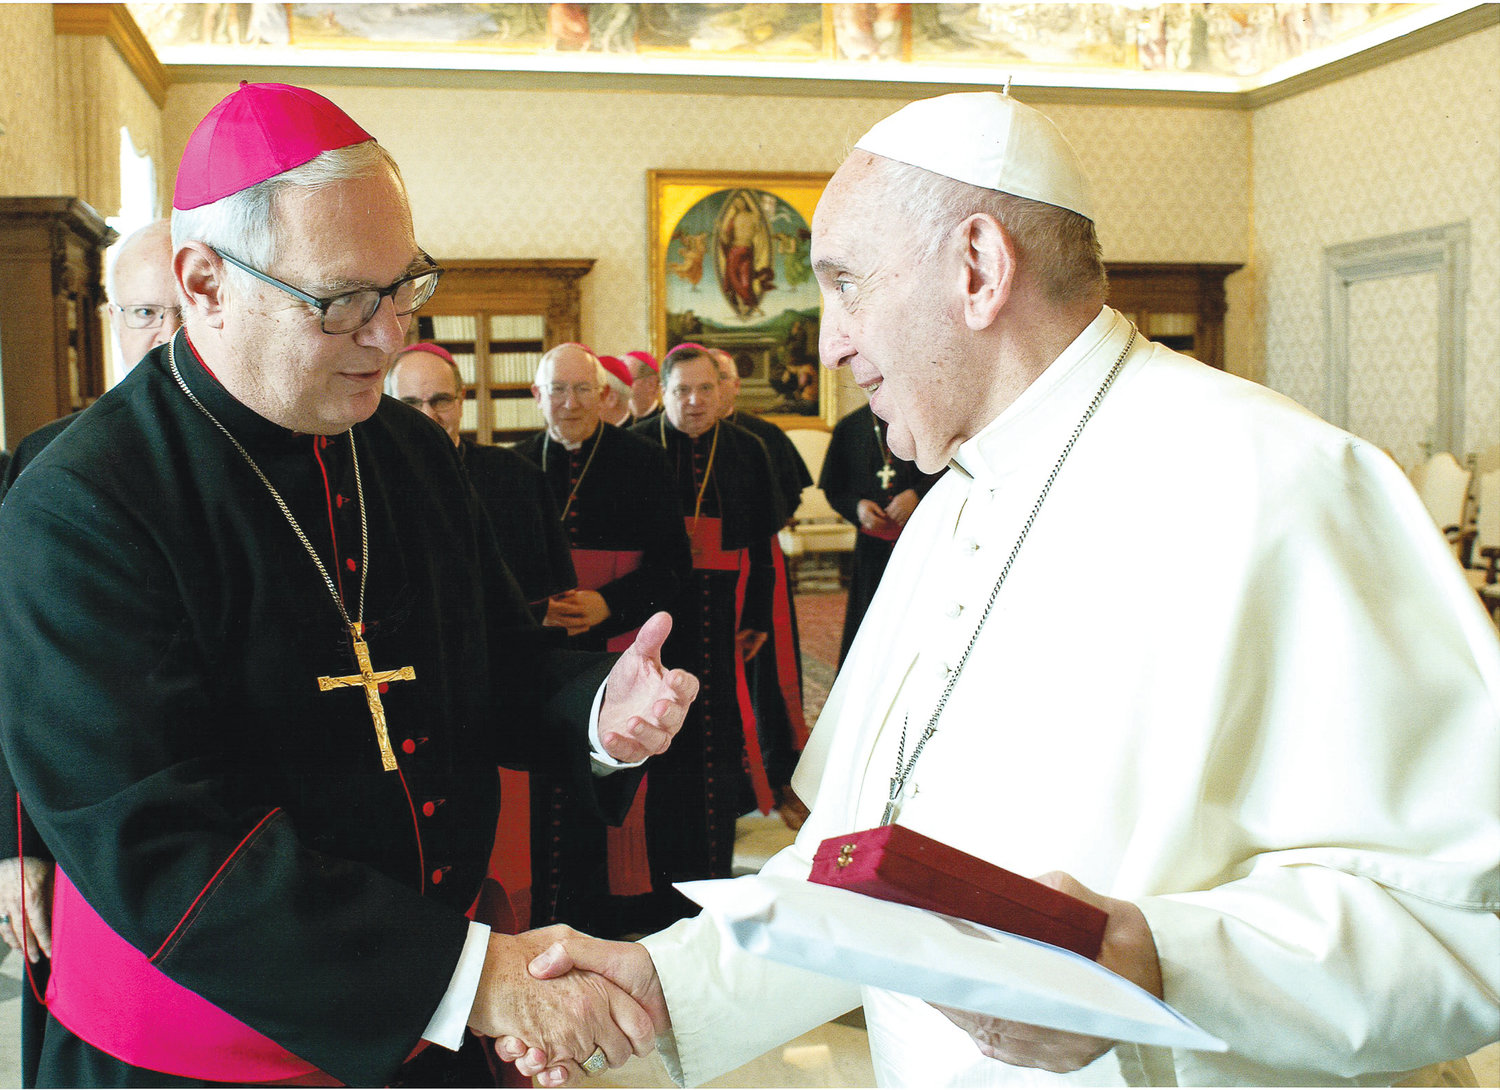 Bishop Thomas J. Tobin greets Pope Francis during the ad limina visit, joining two dozen fellow shepherds from across the New England region, including Auxiliary Bishop Robert C. Evans, to discuss the state of their dioceses with the Holy Father and officials of the Roman Curia and dicasteries.